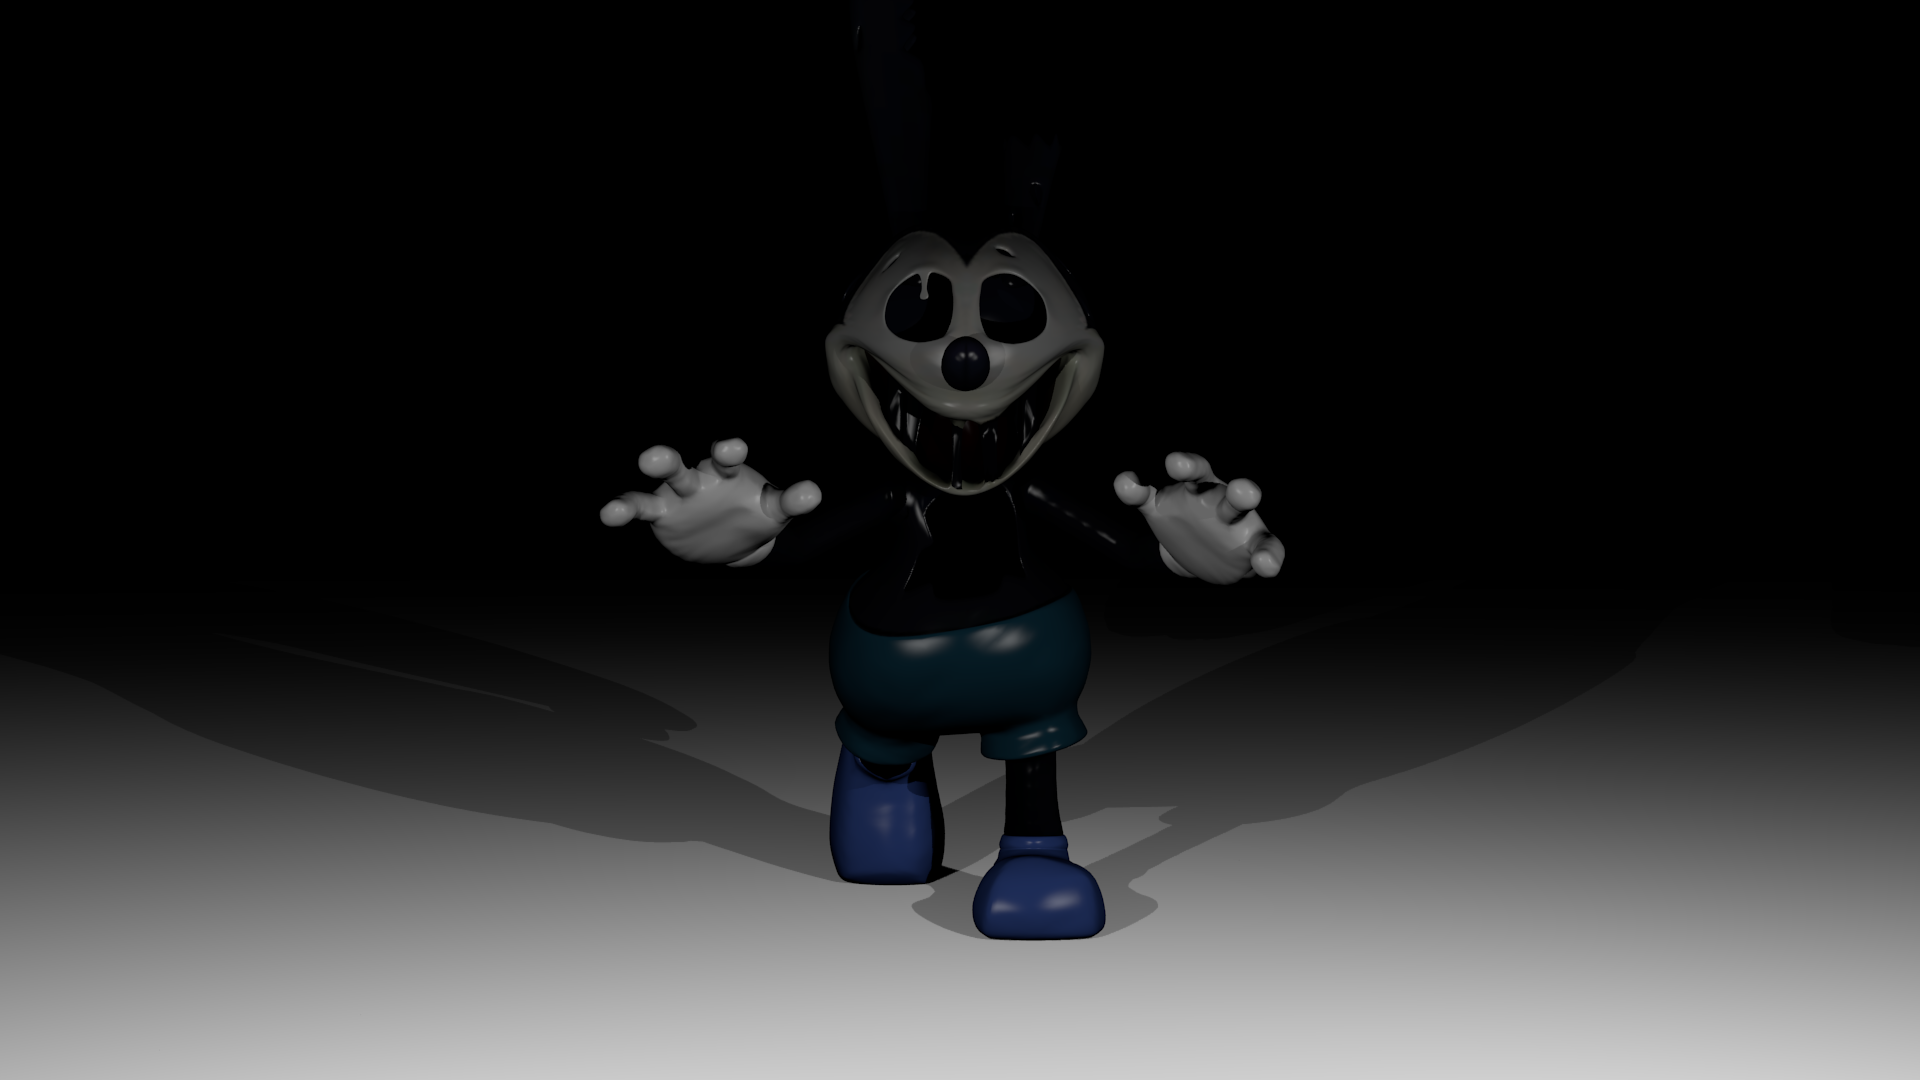 Oswald the Lucky Rabbit, He's an antagonist in Abandoned: Discover...